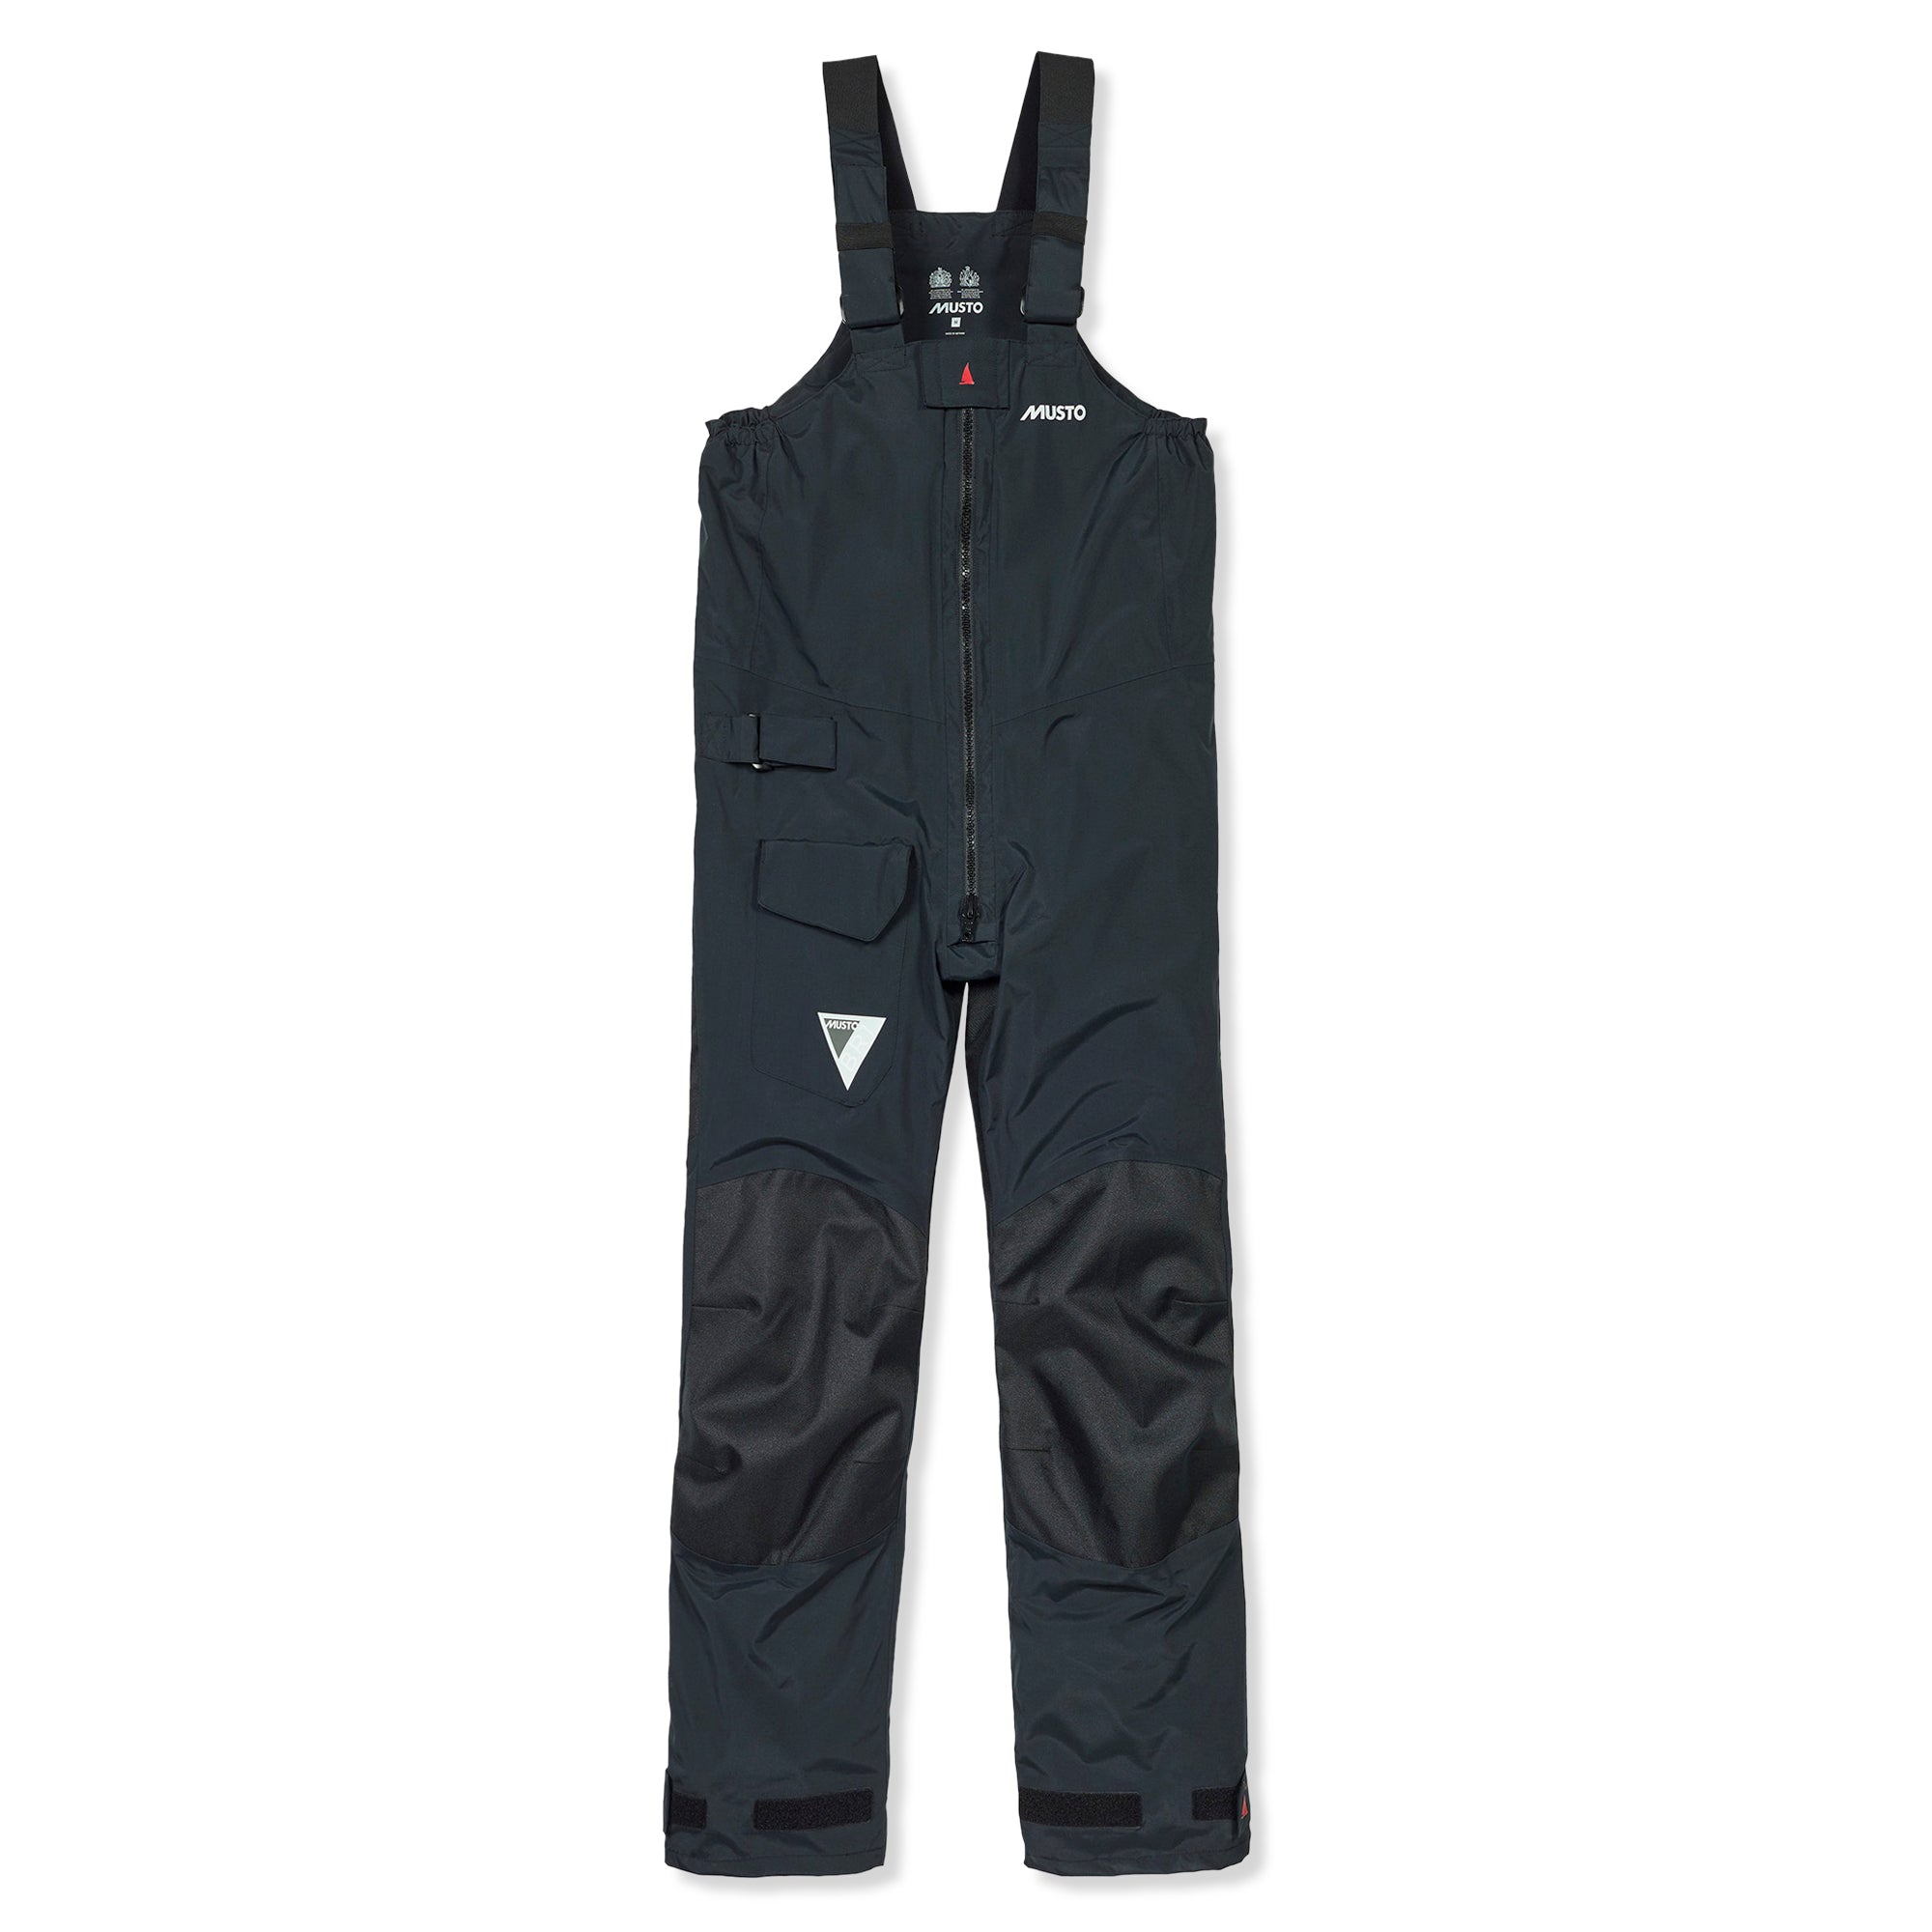 MUSTO BR1 PANTS